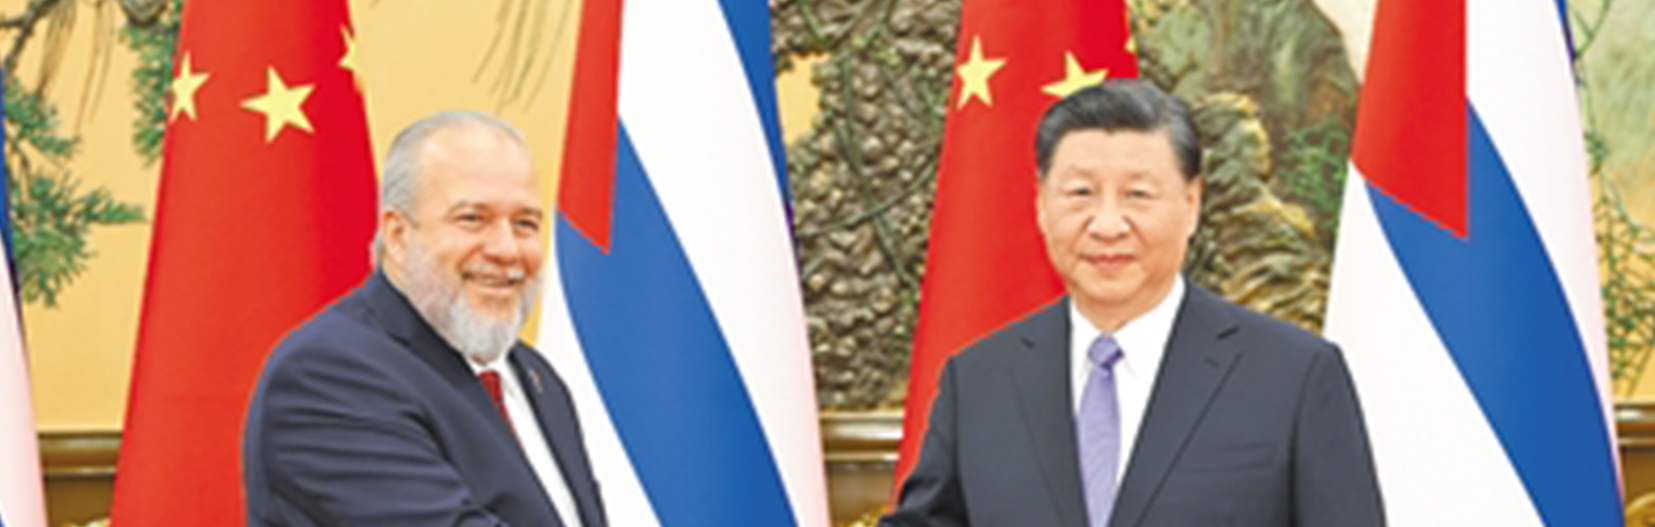 Xi meets Cuban prime minister, calling for further strategic coordination